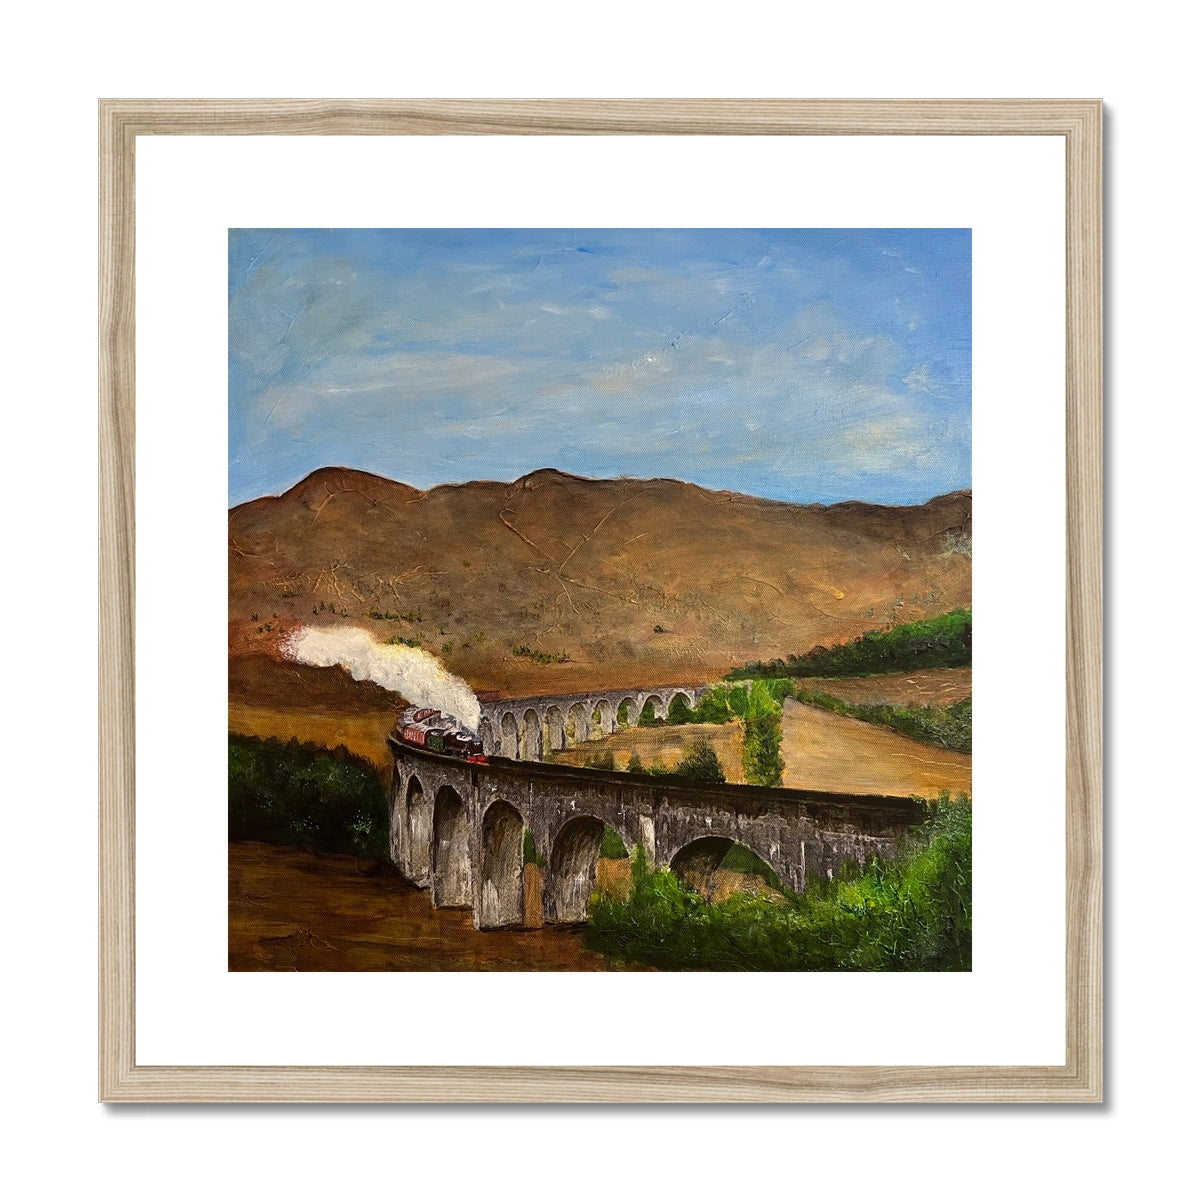 Glenfinnan Viaduct Painting | Framed & Mounted Prints From Scotland-Framed & Mounted Prints-Scottish Highlands & Lowlands Art Gallery-20"x20"-Natural Frame-Paintings, Prints, Homeware, Art Gifts From Scotland By Scottish Artist Kevin Hunter